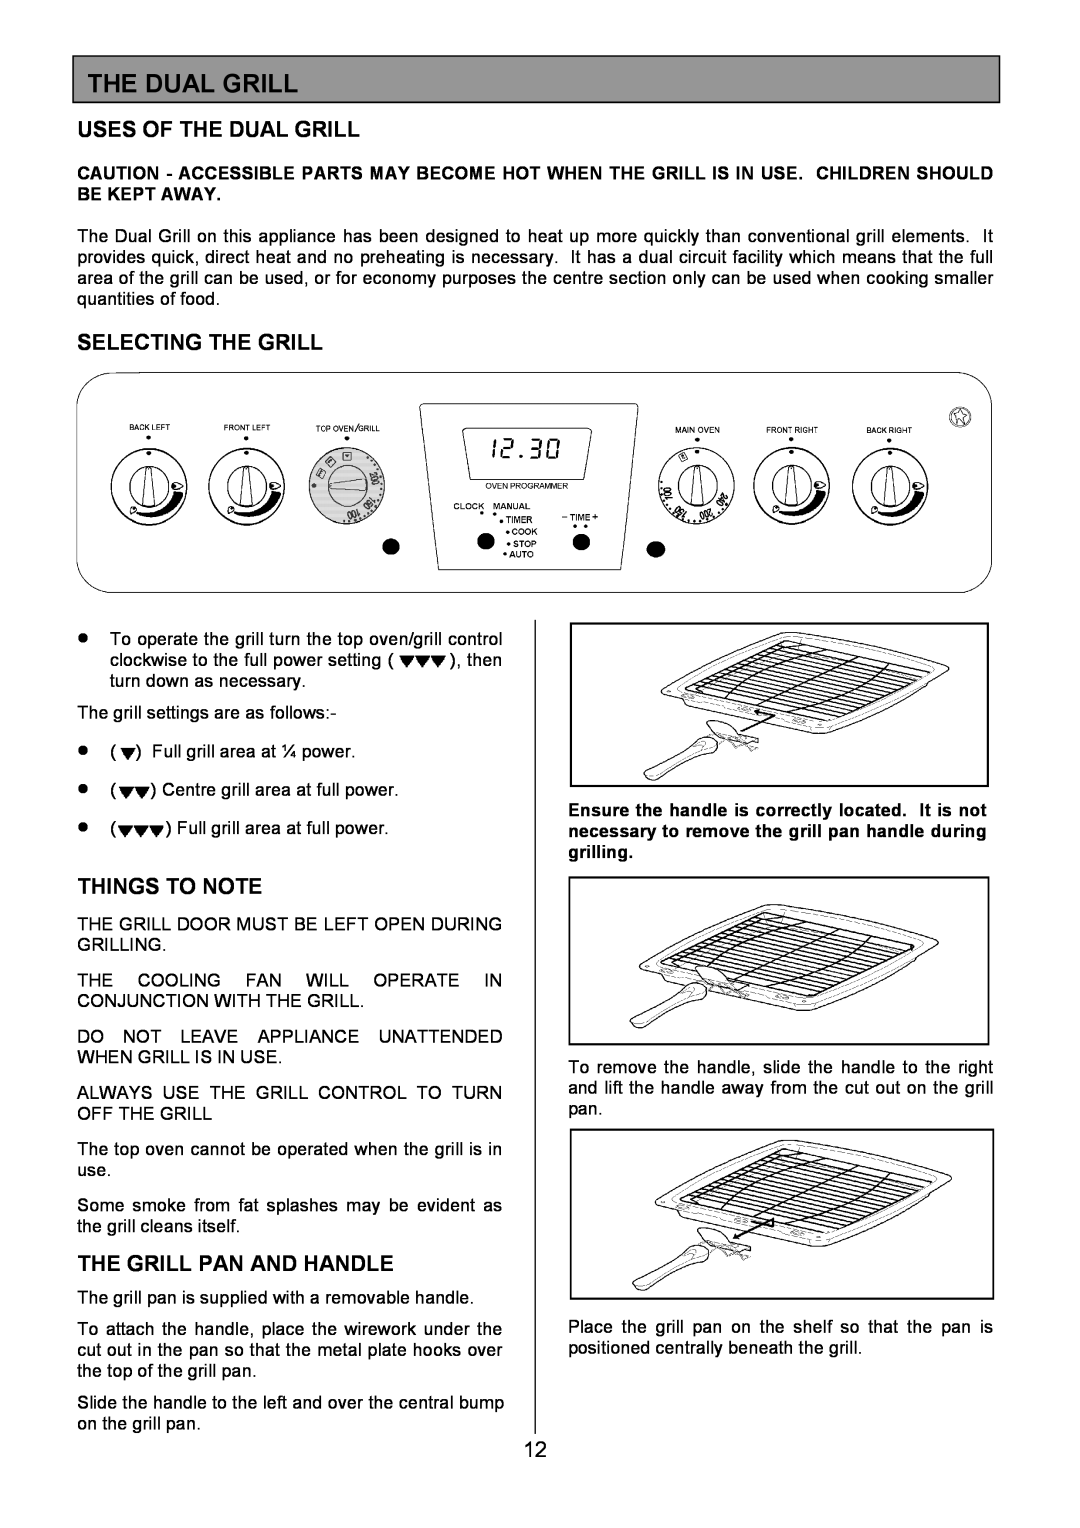 Zanussi ZCM 8021 manual Uses Of The Dual Grill, Selecting The Grill, The Grill Pan And Handle, Things To Note 